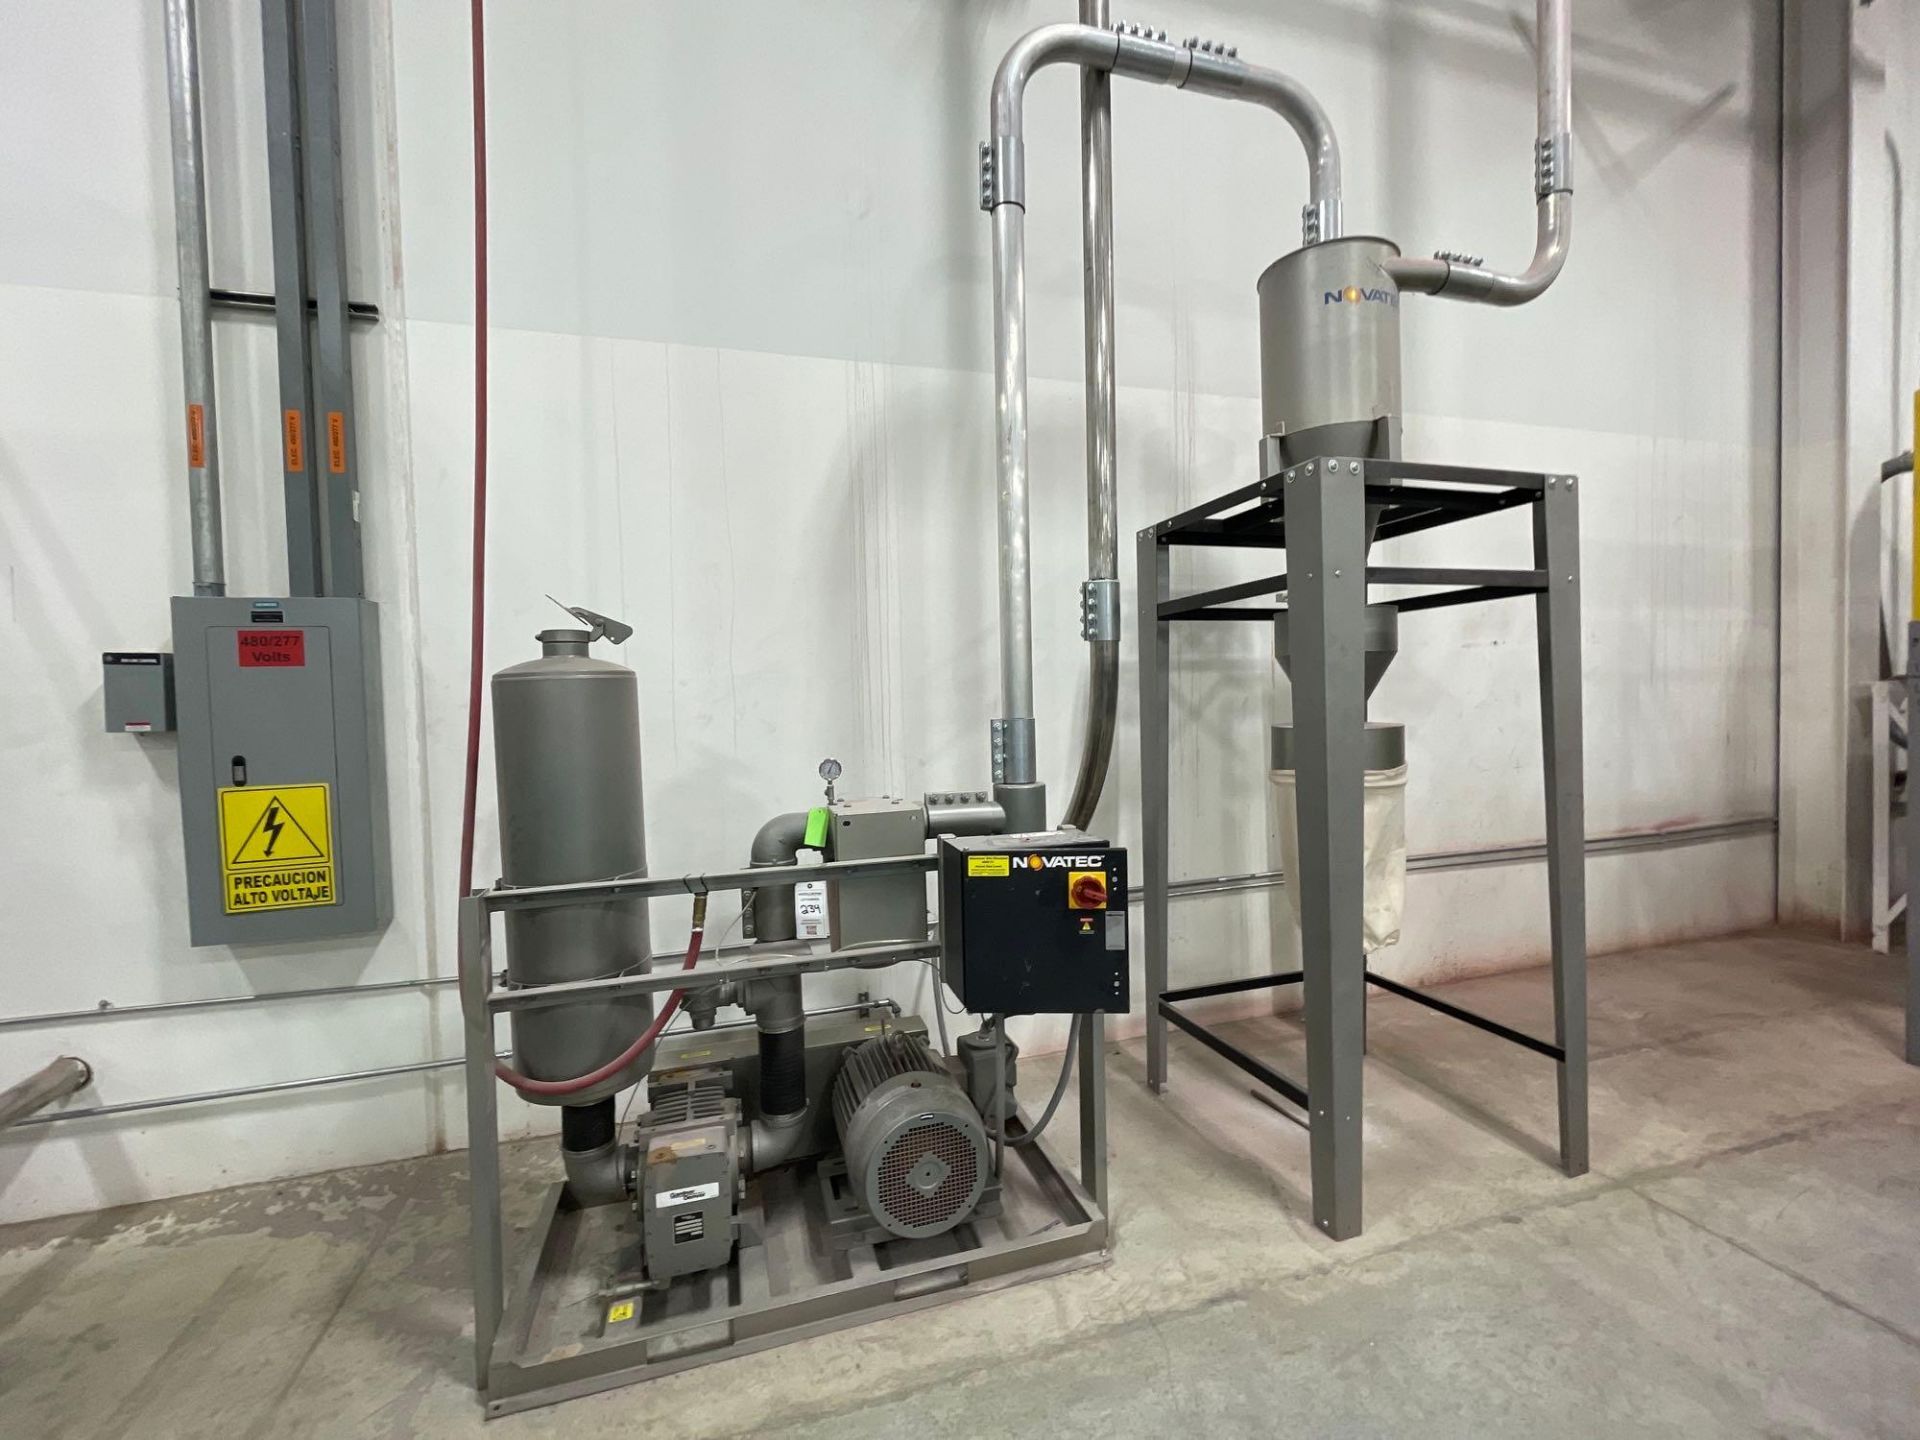 Novatec Pump and Dust Collector (2021) - Image 4 of 4